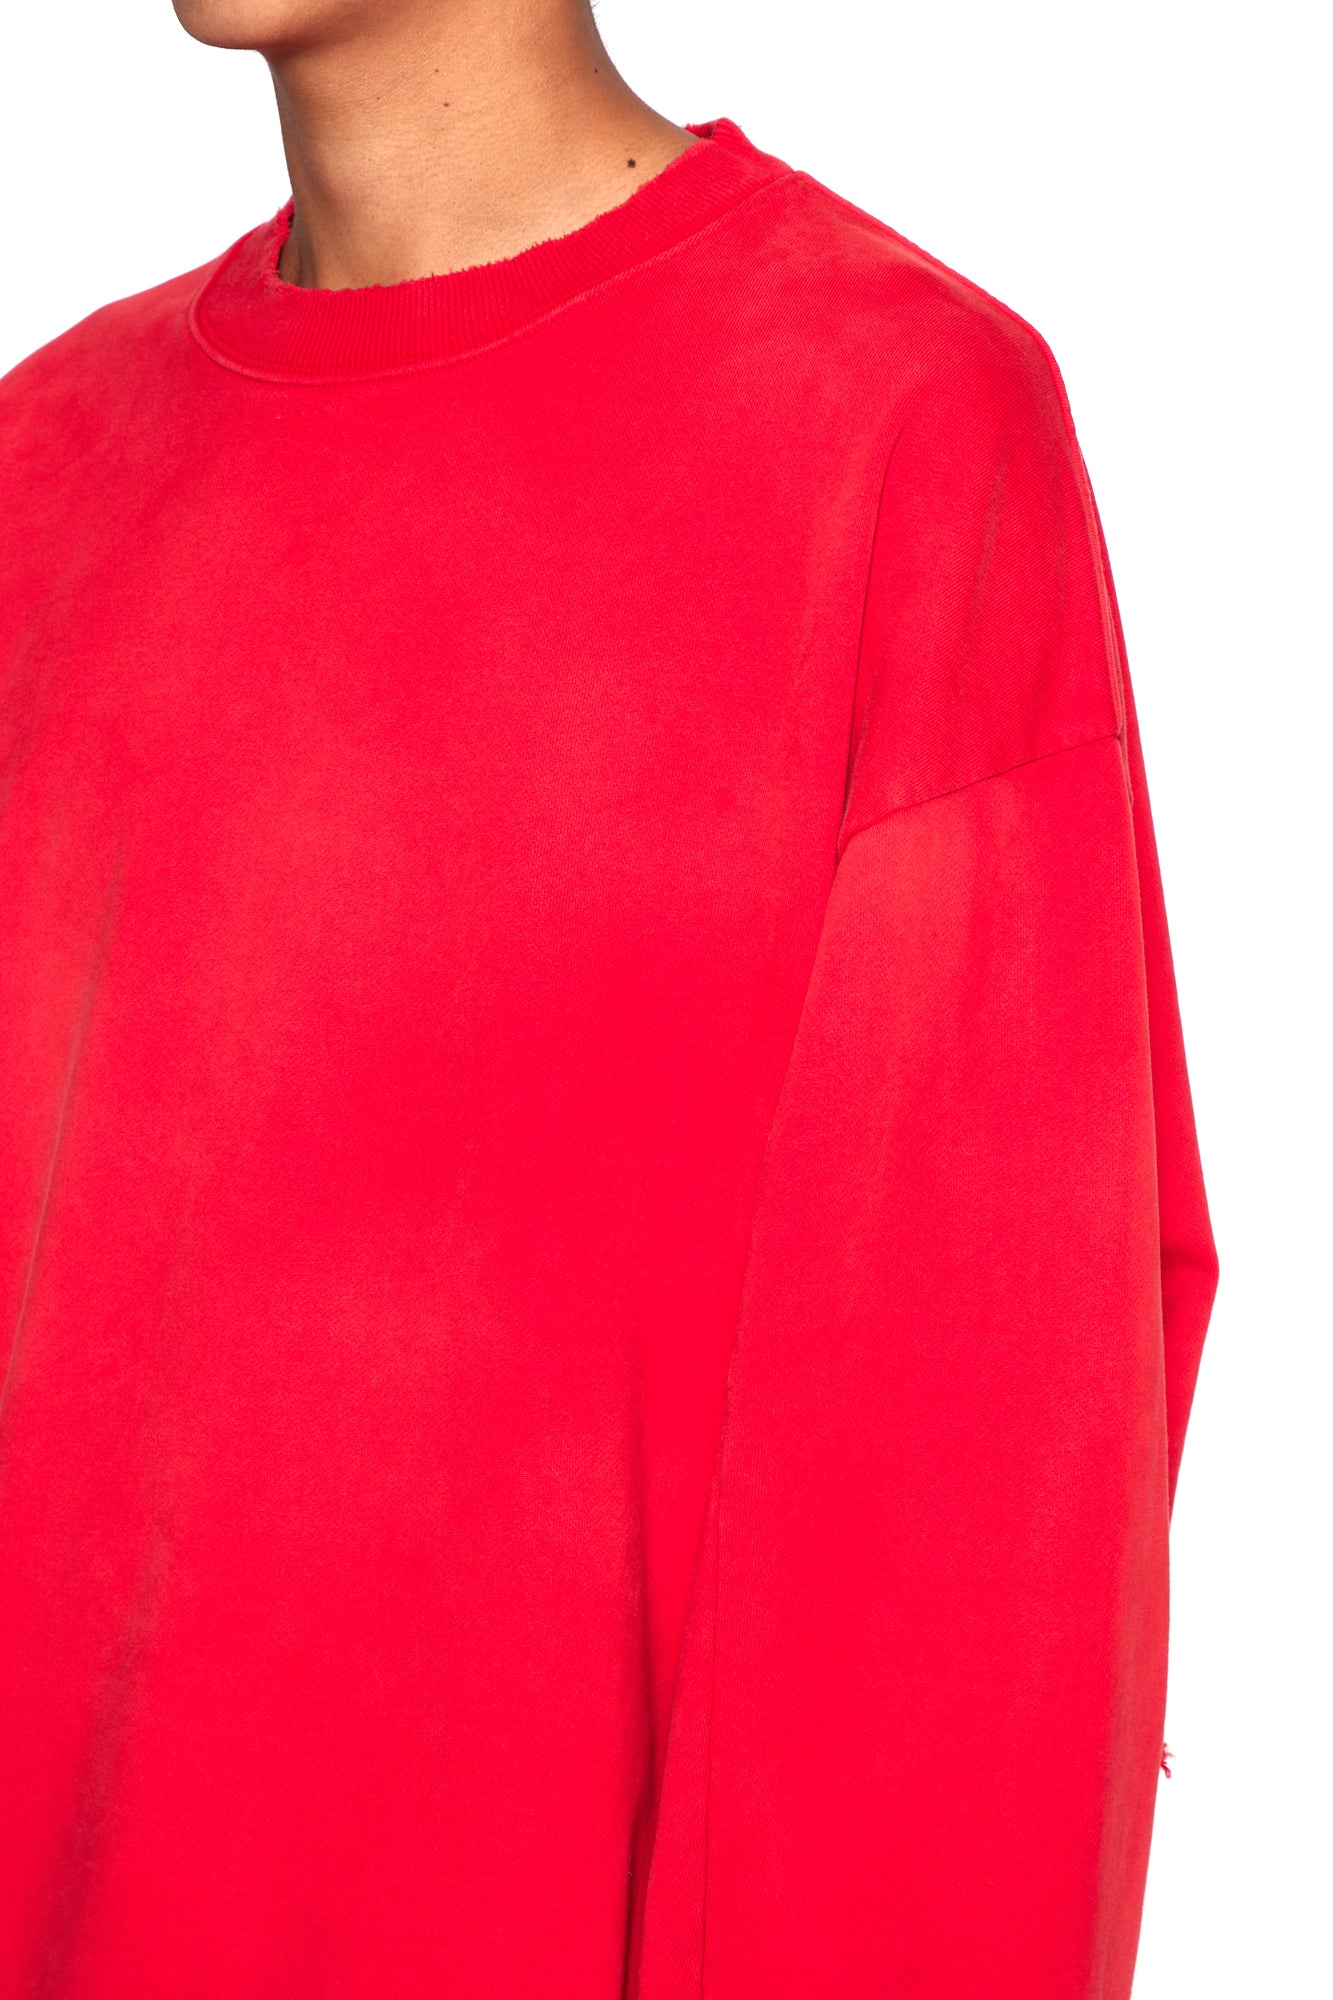 RED WASHED DISTRESSED AGING SWEATSHIRT